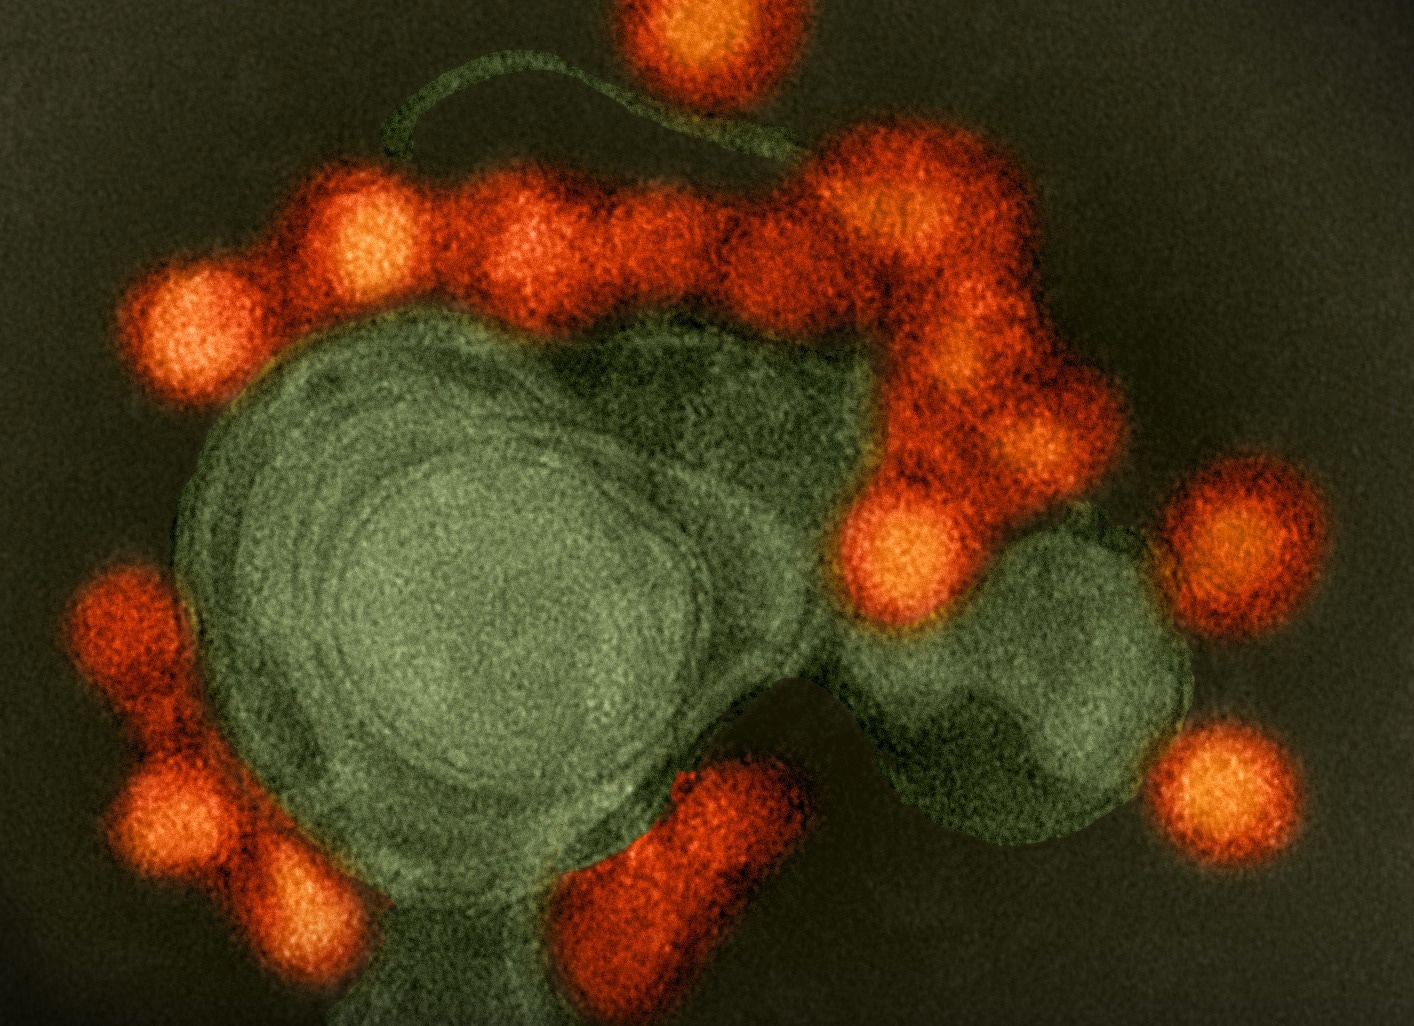 Study: A Zika virus-specific IgM elicited in pregnancy exhibits ultrapotent neutralization. Image Credit: NIAID